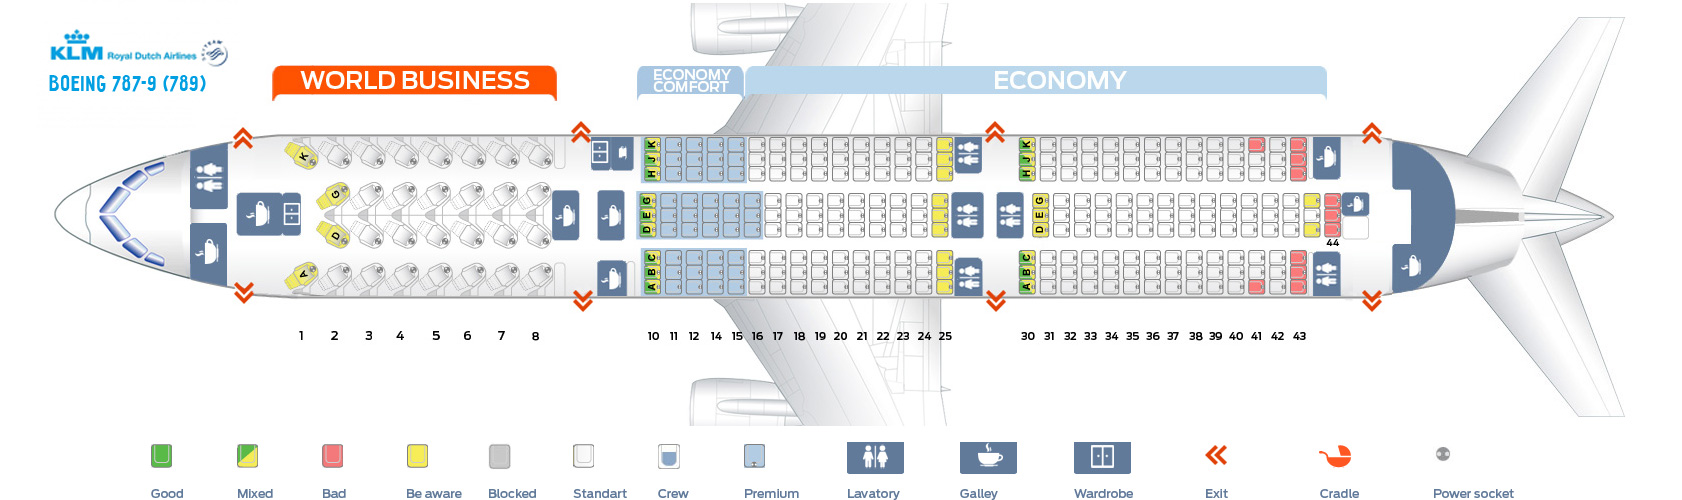 Seat Map Boeing Dreamliner Klm Best Seats In The Plane